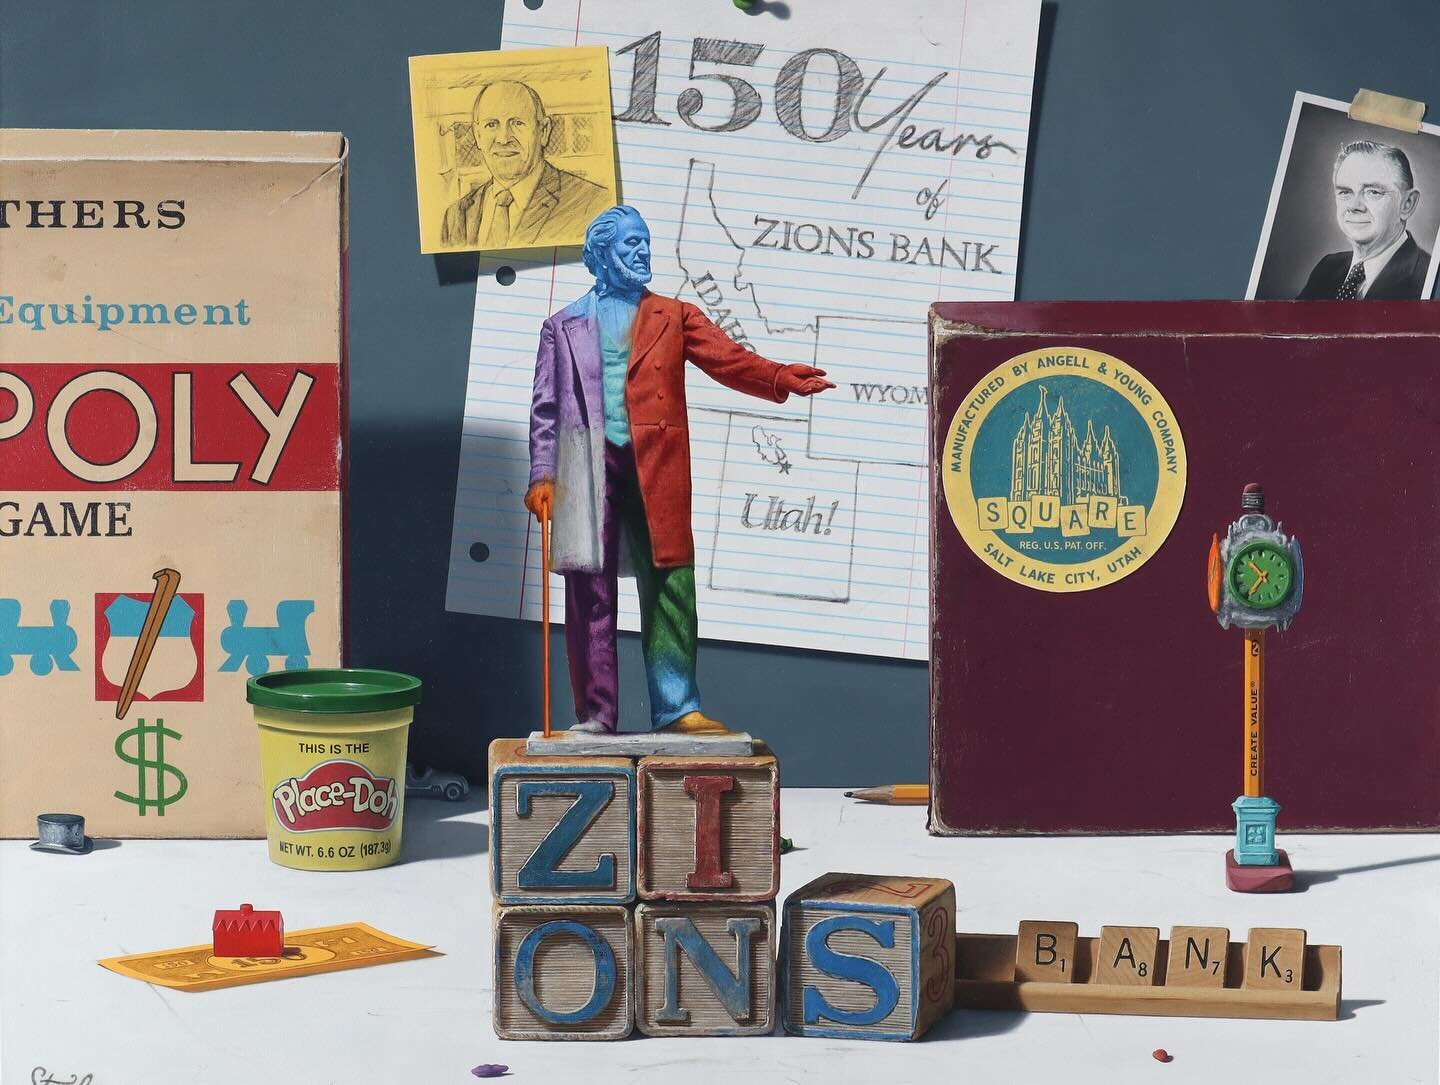 In celebration of Zions Bank&rsquo;s 150 year anniversary, I got the opportunity to do a commissioned work to reflect their rich history. Completely enjoyed the process from beginning to end and got to unveil it to many of their downtown team members